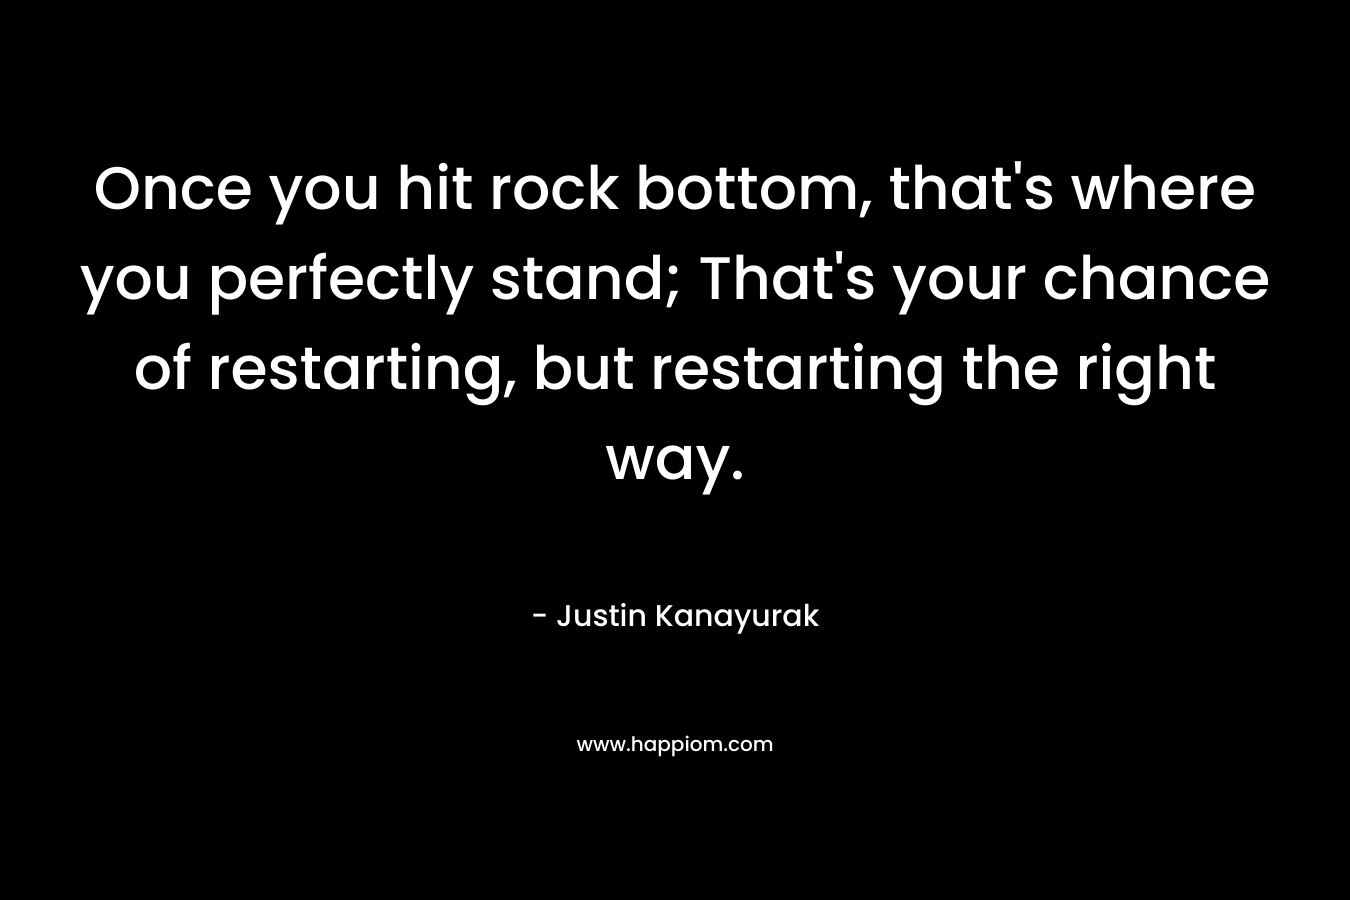 Once you hit rock bottom, that's where you perfectly stand; That's your chance of restarting, but restarting the right way.